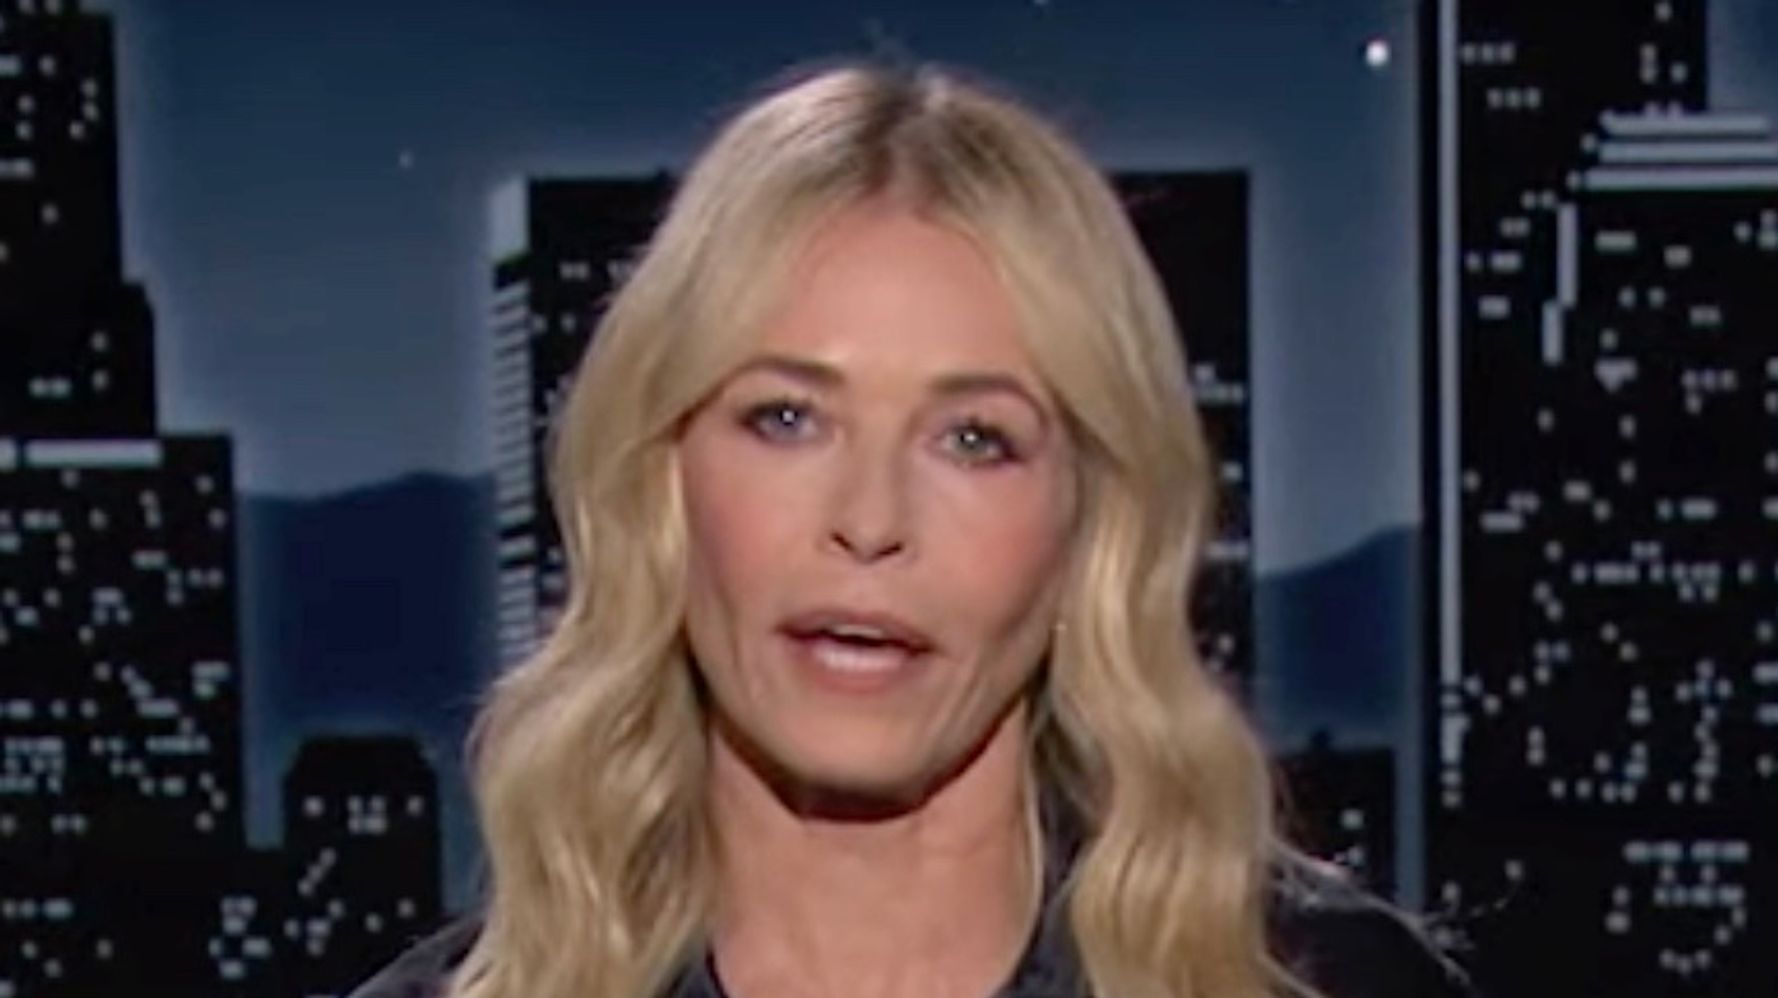 ‘Kimmel’ Guest Chelsea Handler Has Perfect Response To Men About Her 3 Abortions